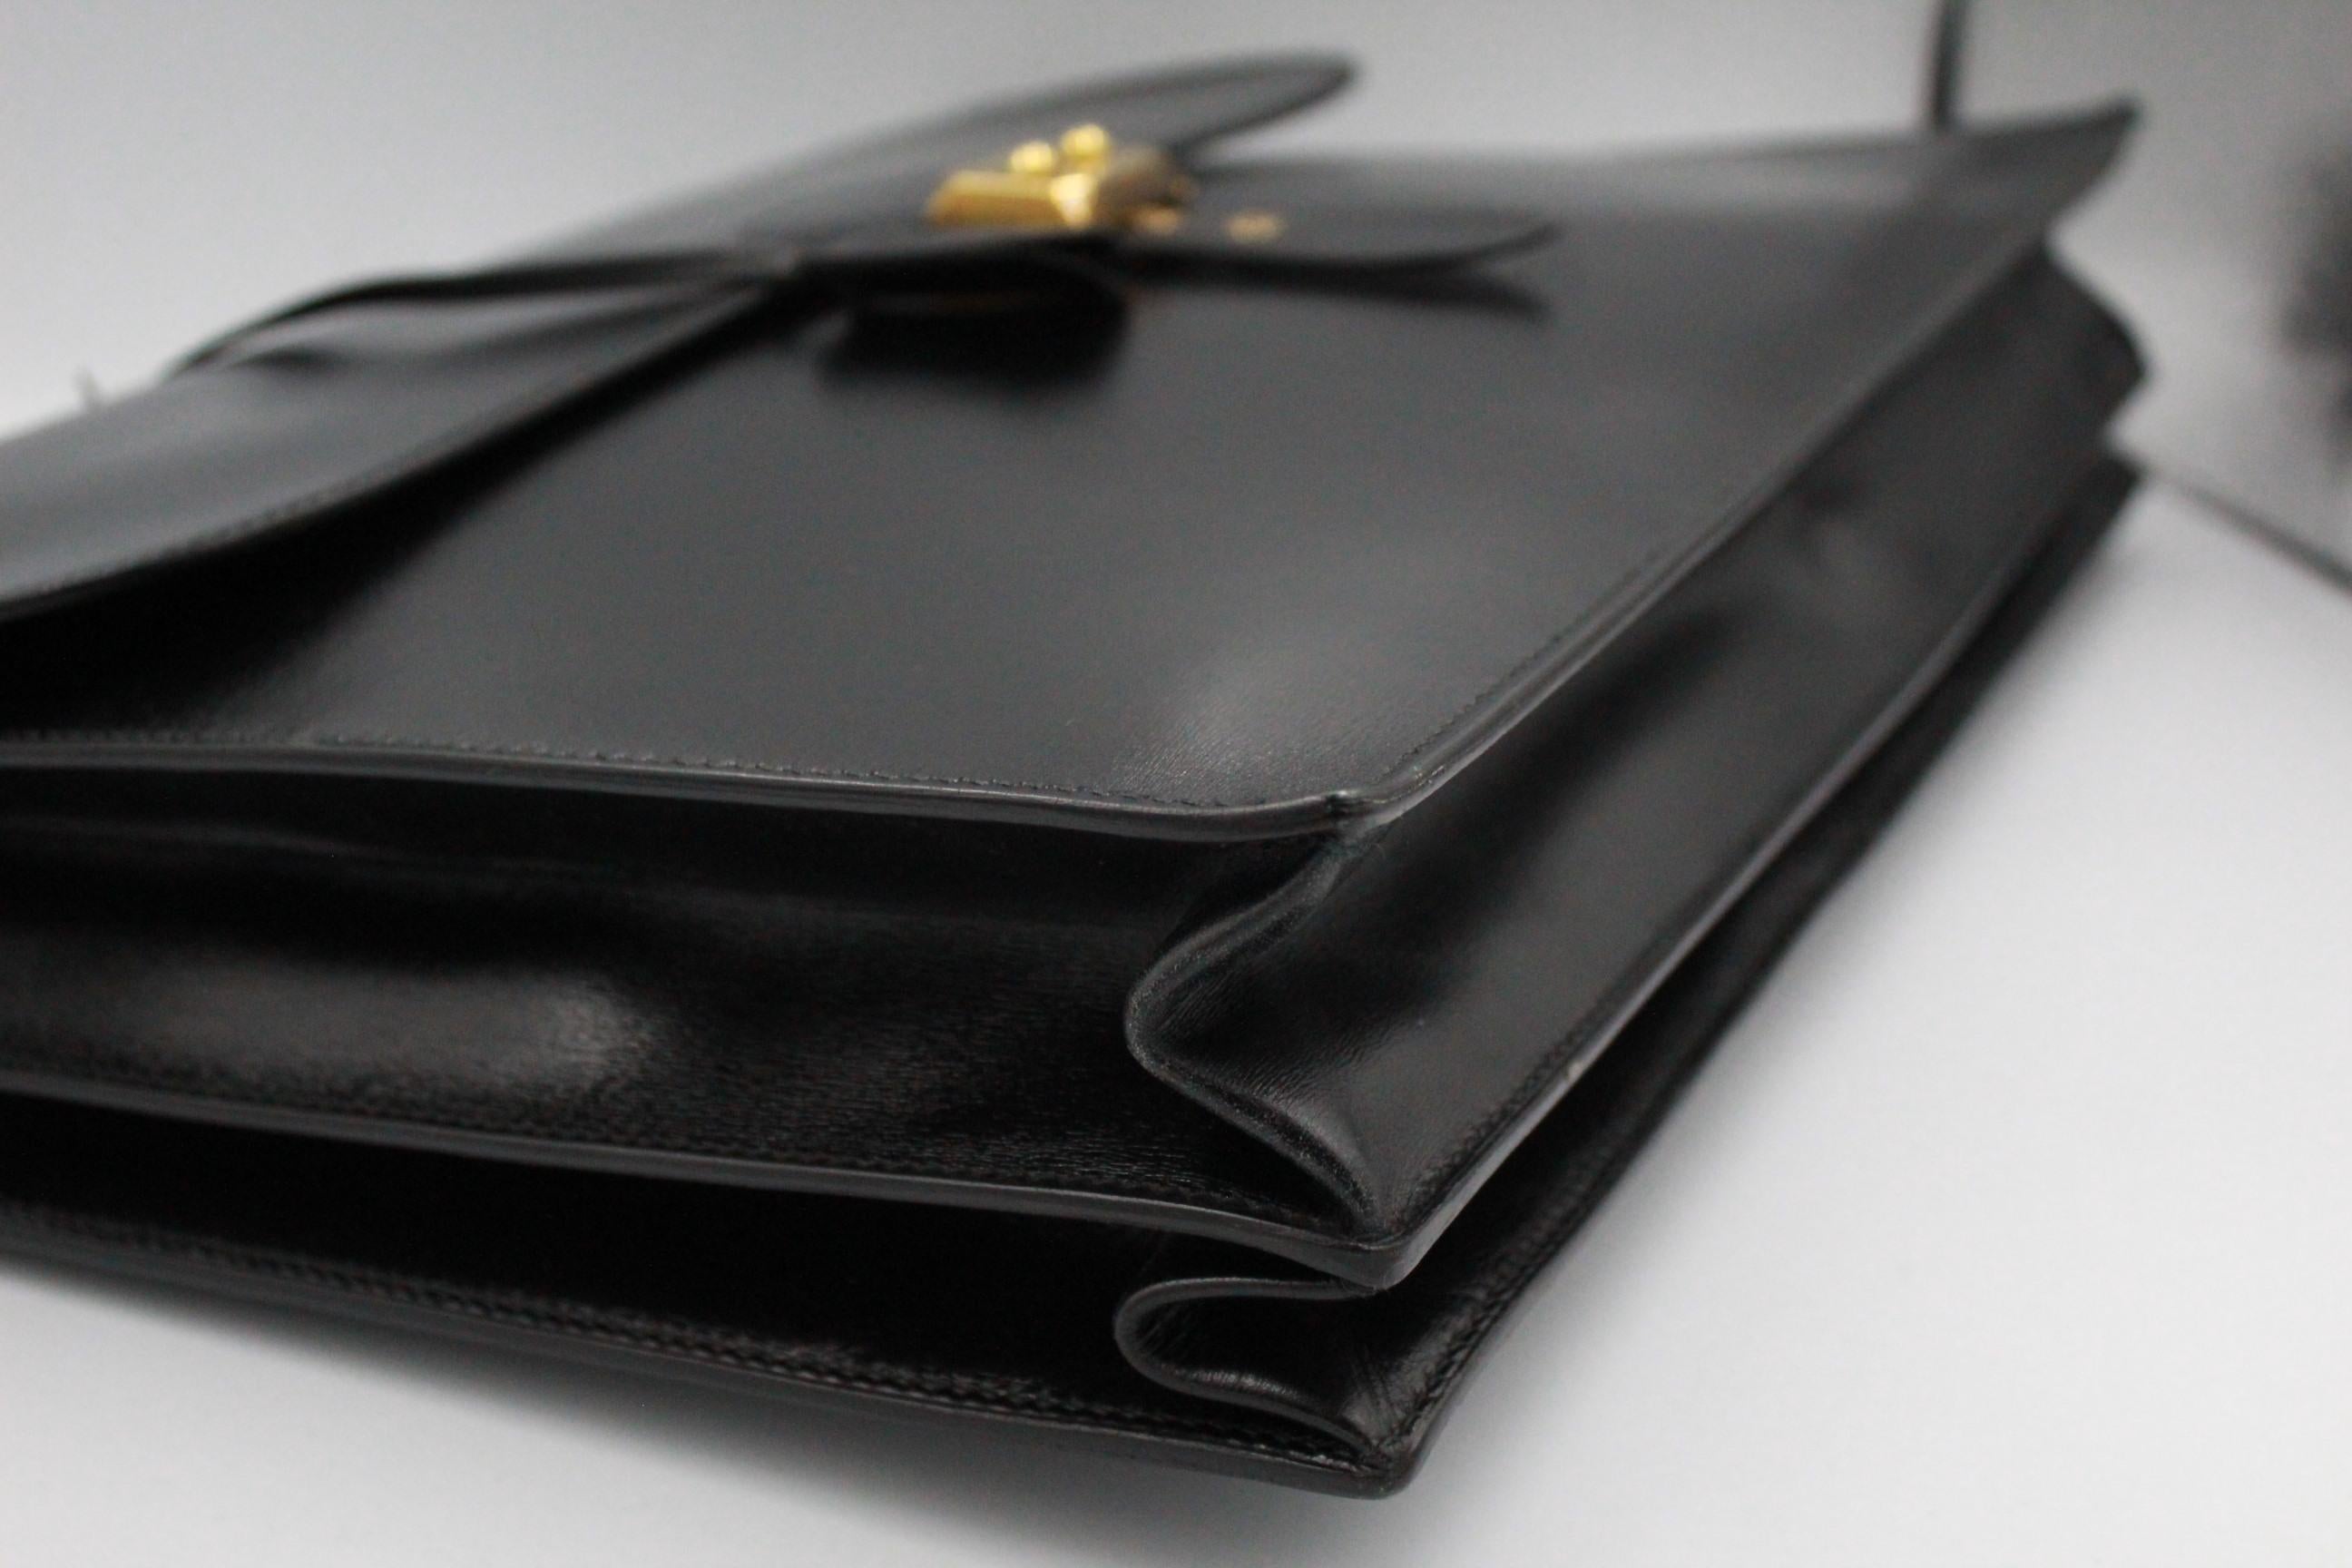 Black Hermes Sac a Depeches Briefcase Bag in black box Leather